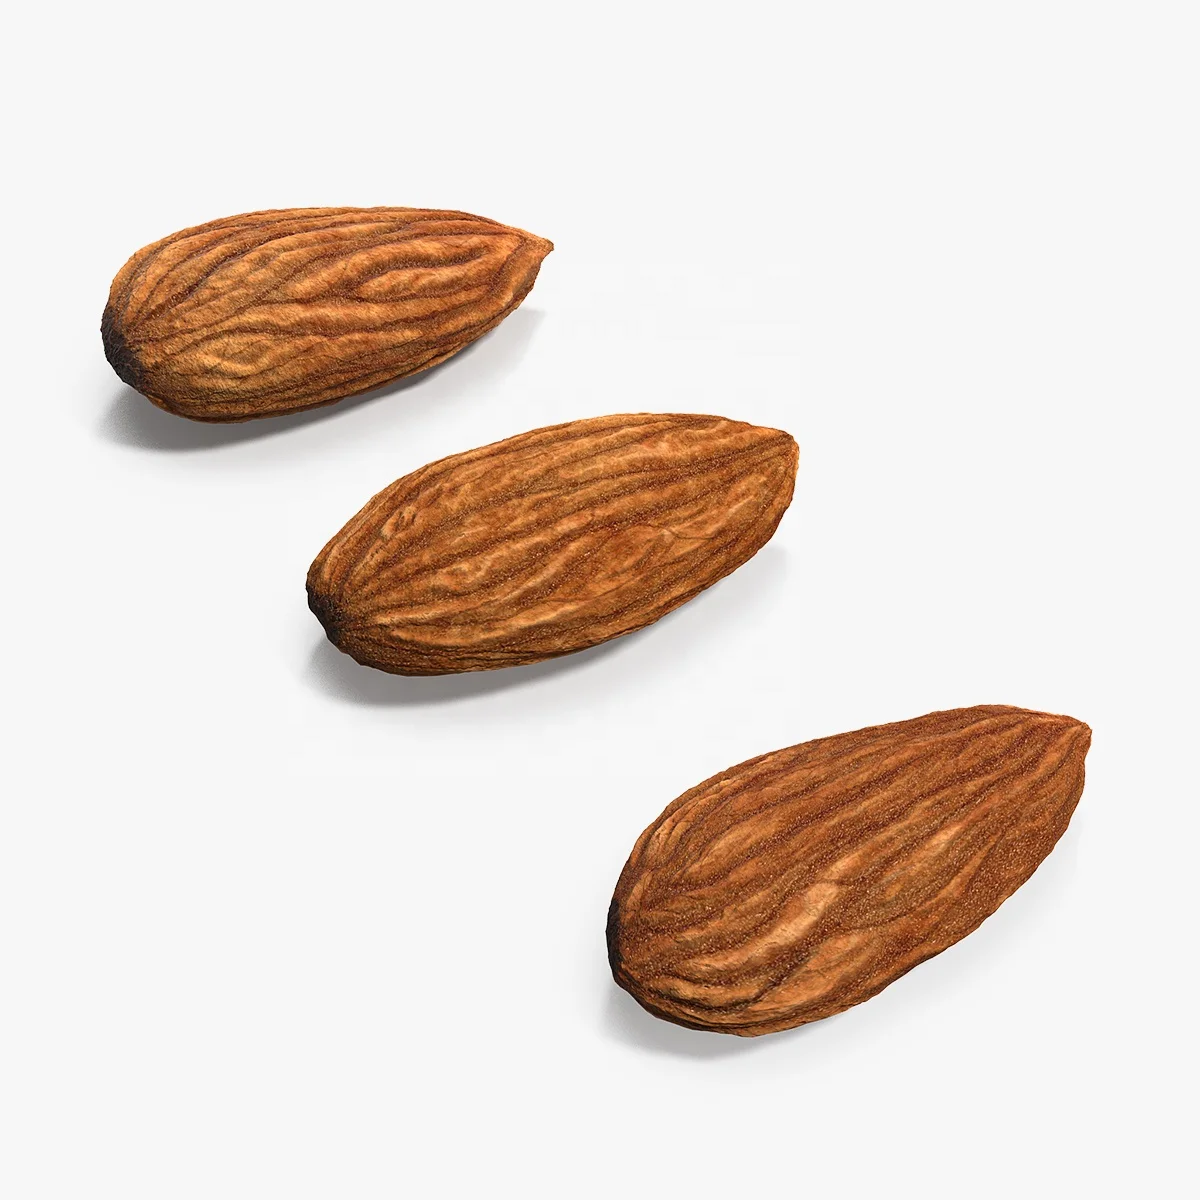 Buy Almonds   Almond Nuts   Raw Bitter and Sweet Kernels   Ships in Bulk a Grade Dried Organic Cultivation (10000008506908)